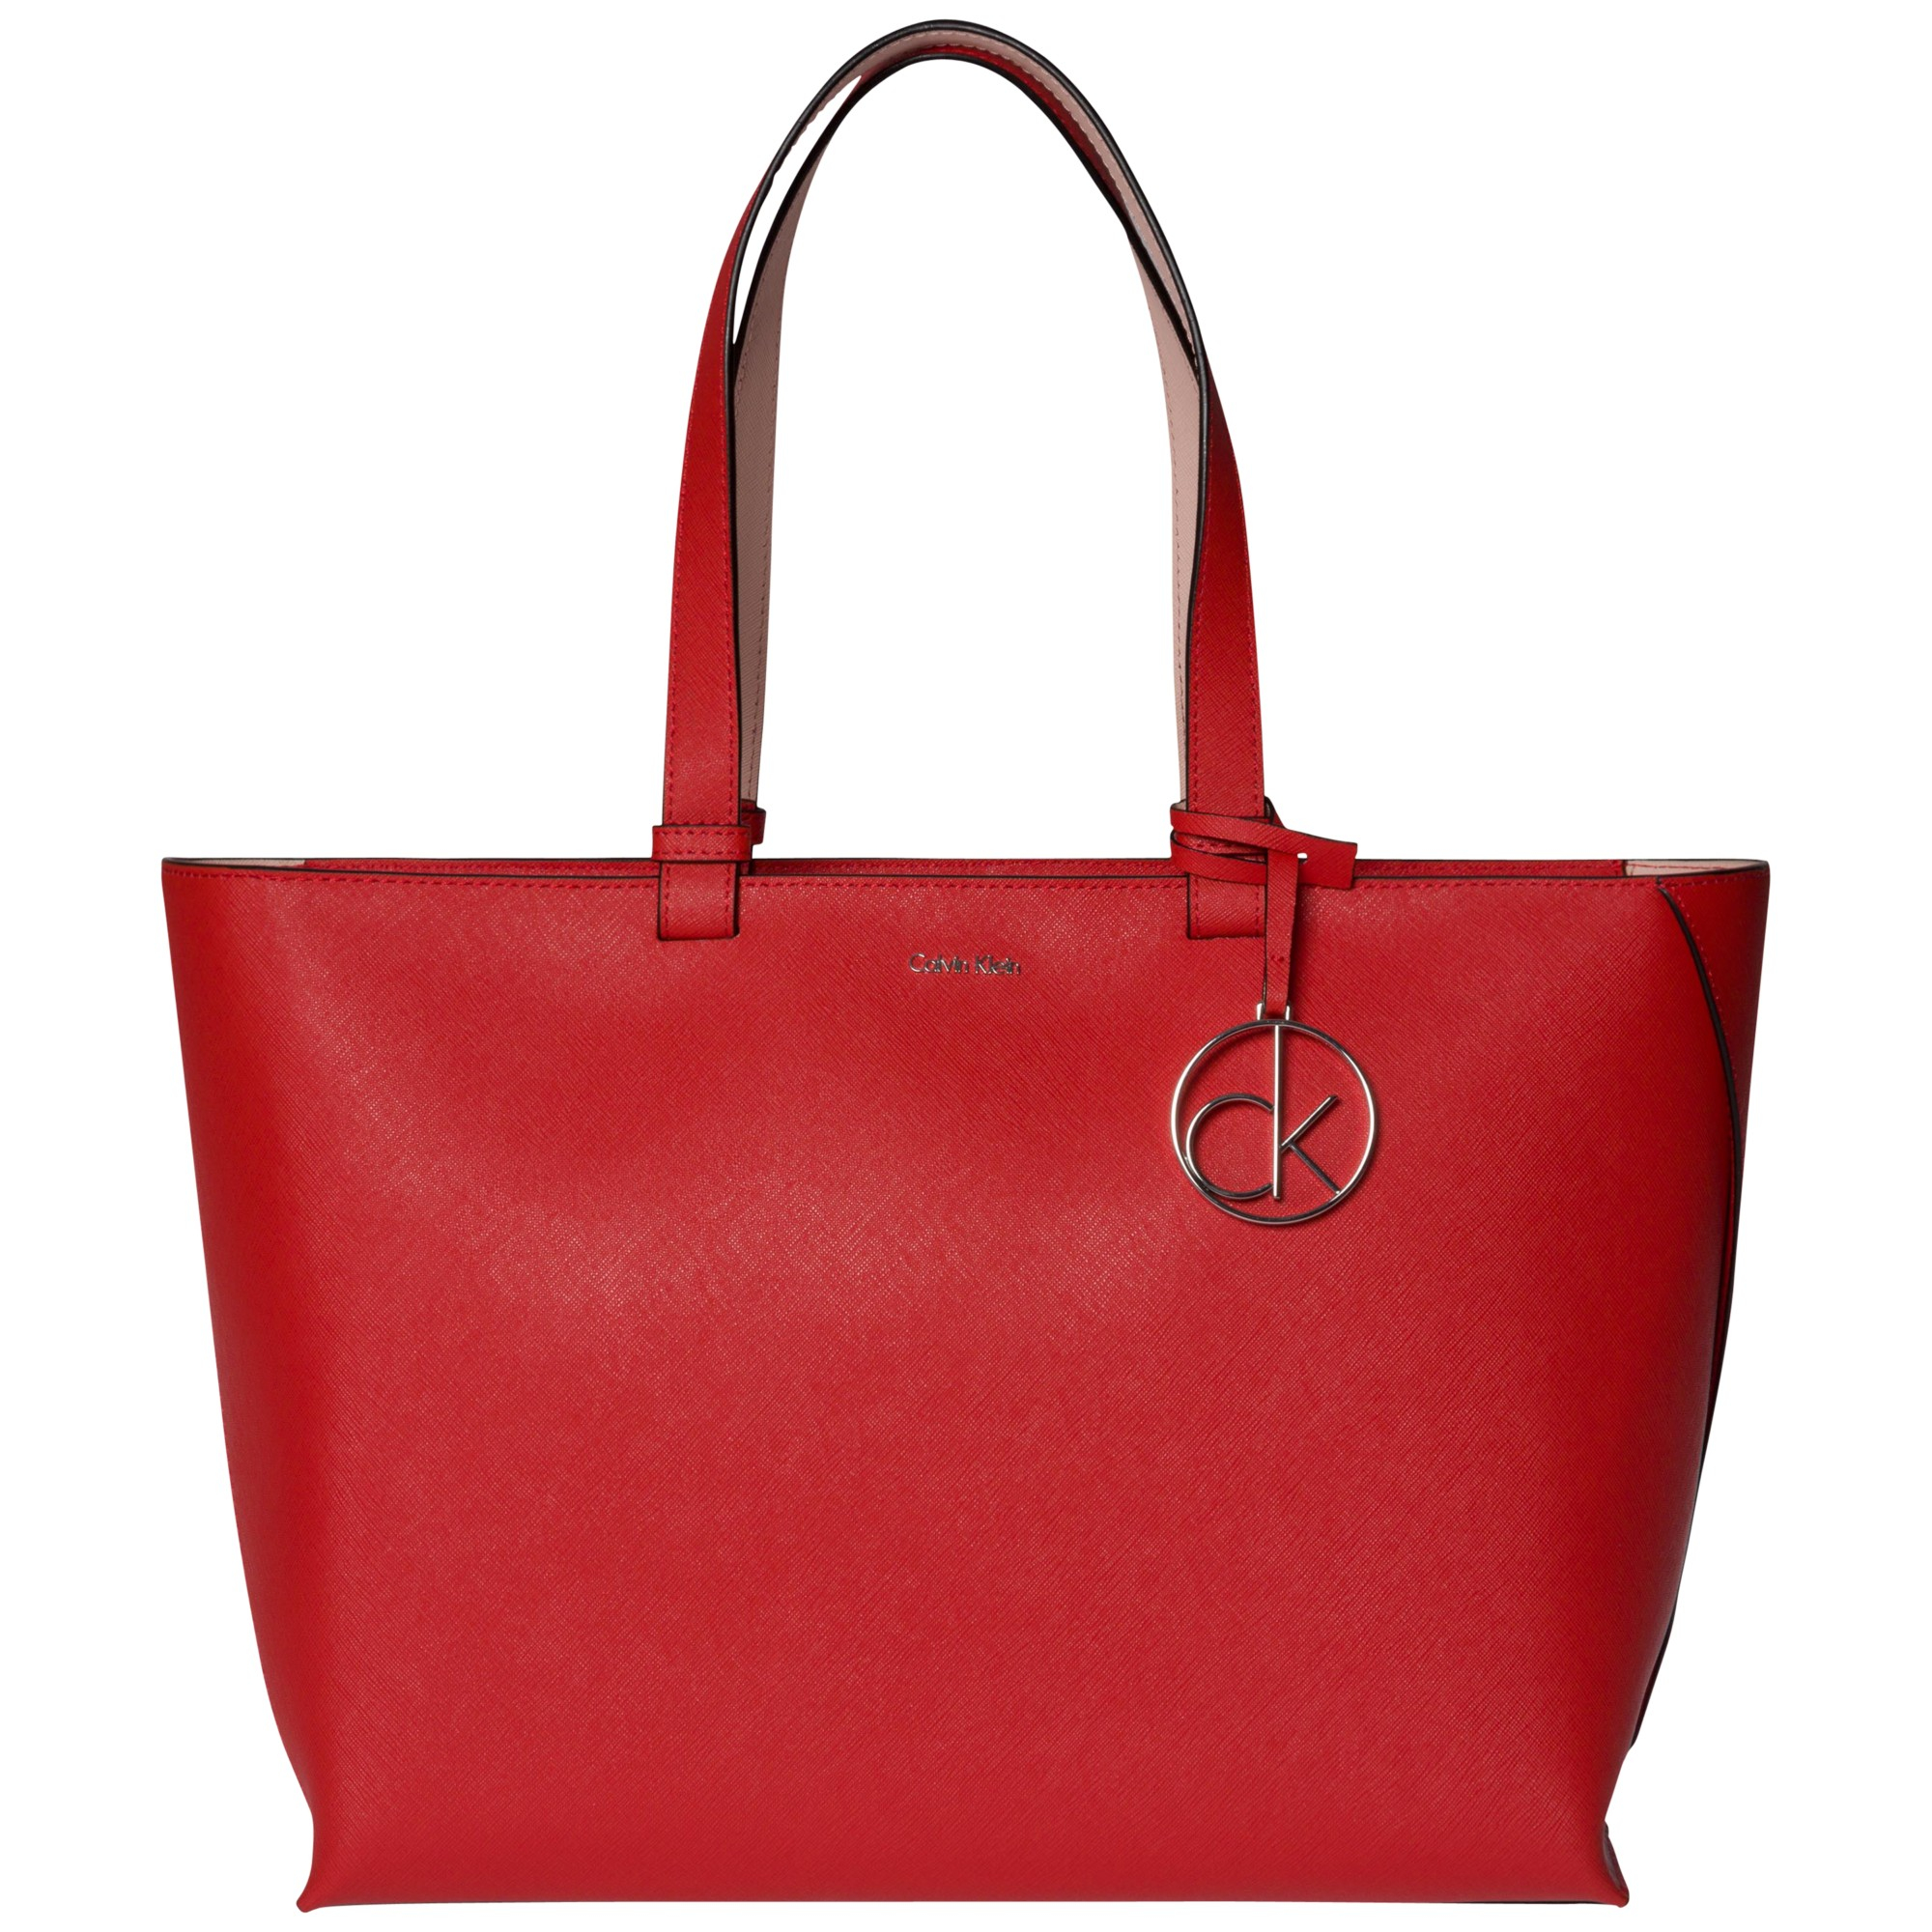 Calvin klein Sofie Large Tote Bag in Red | Lyst